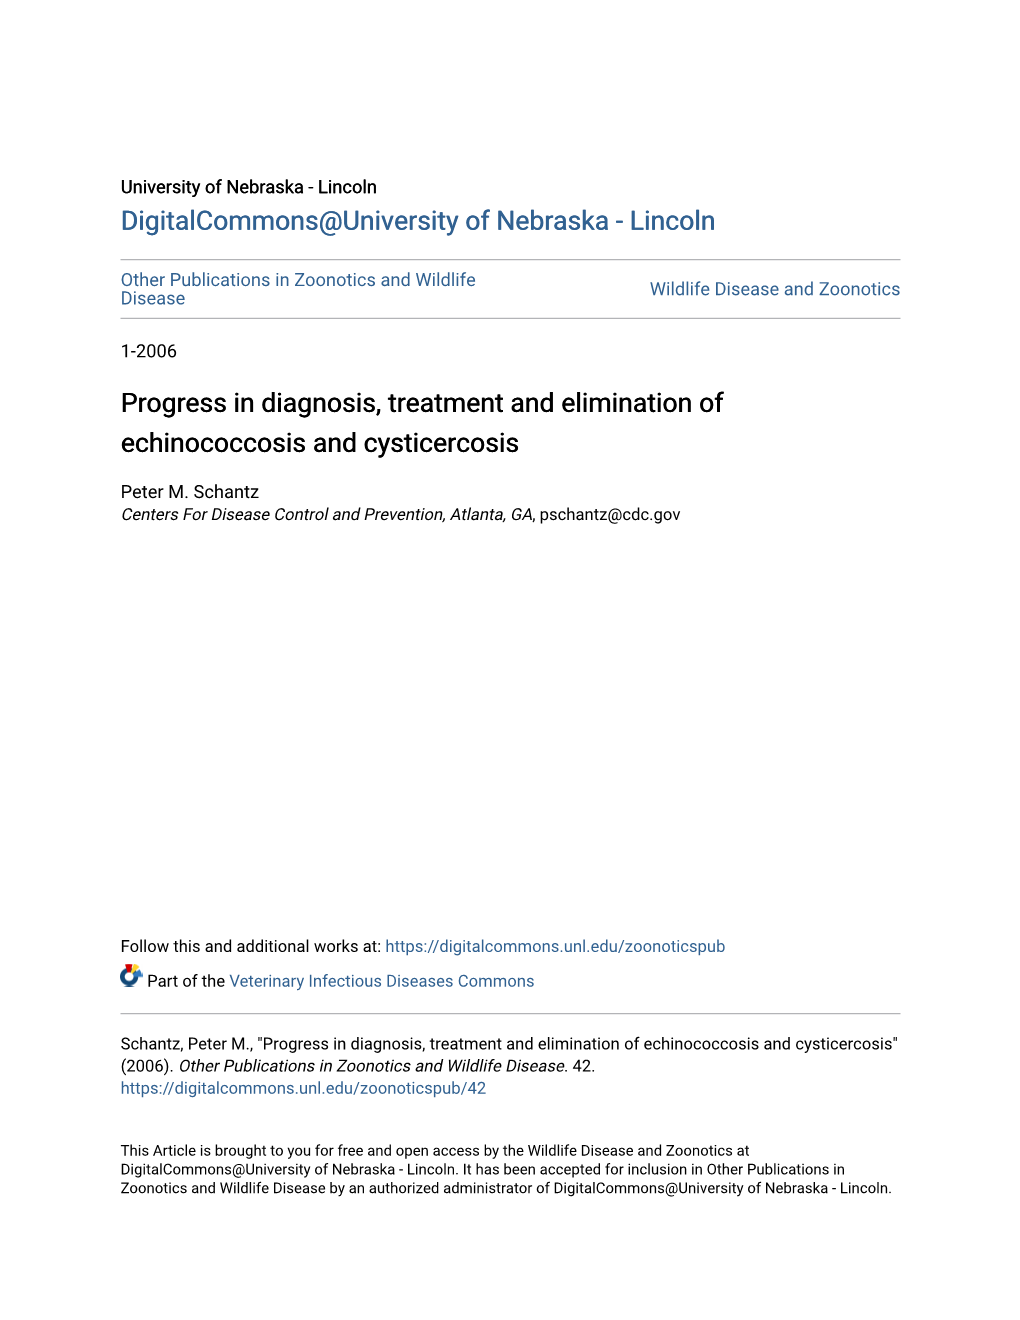 Progress in Diagnosis, Treatment and Elimination of Echinococcosis and Cysticercosis